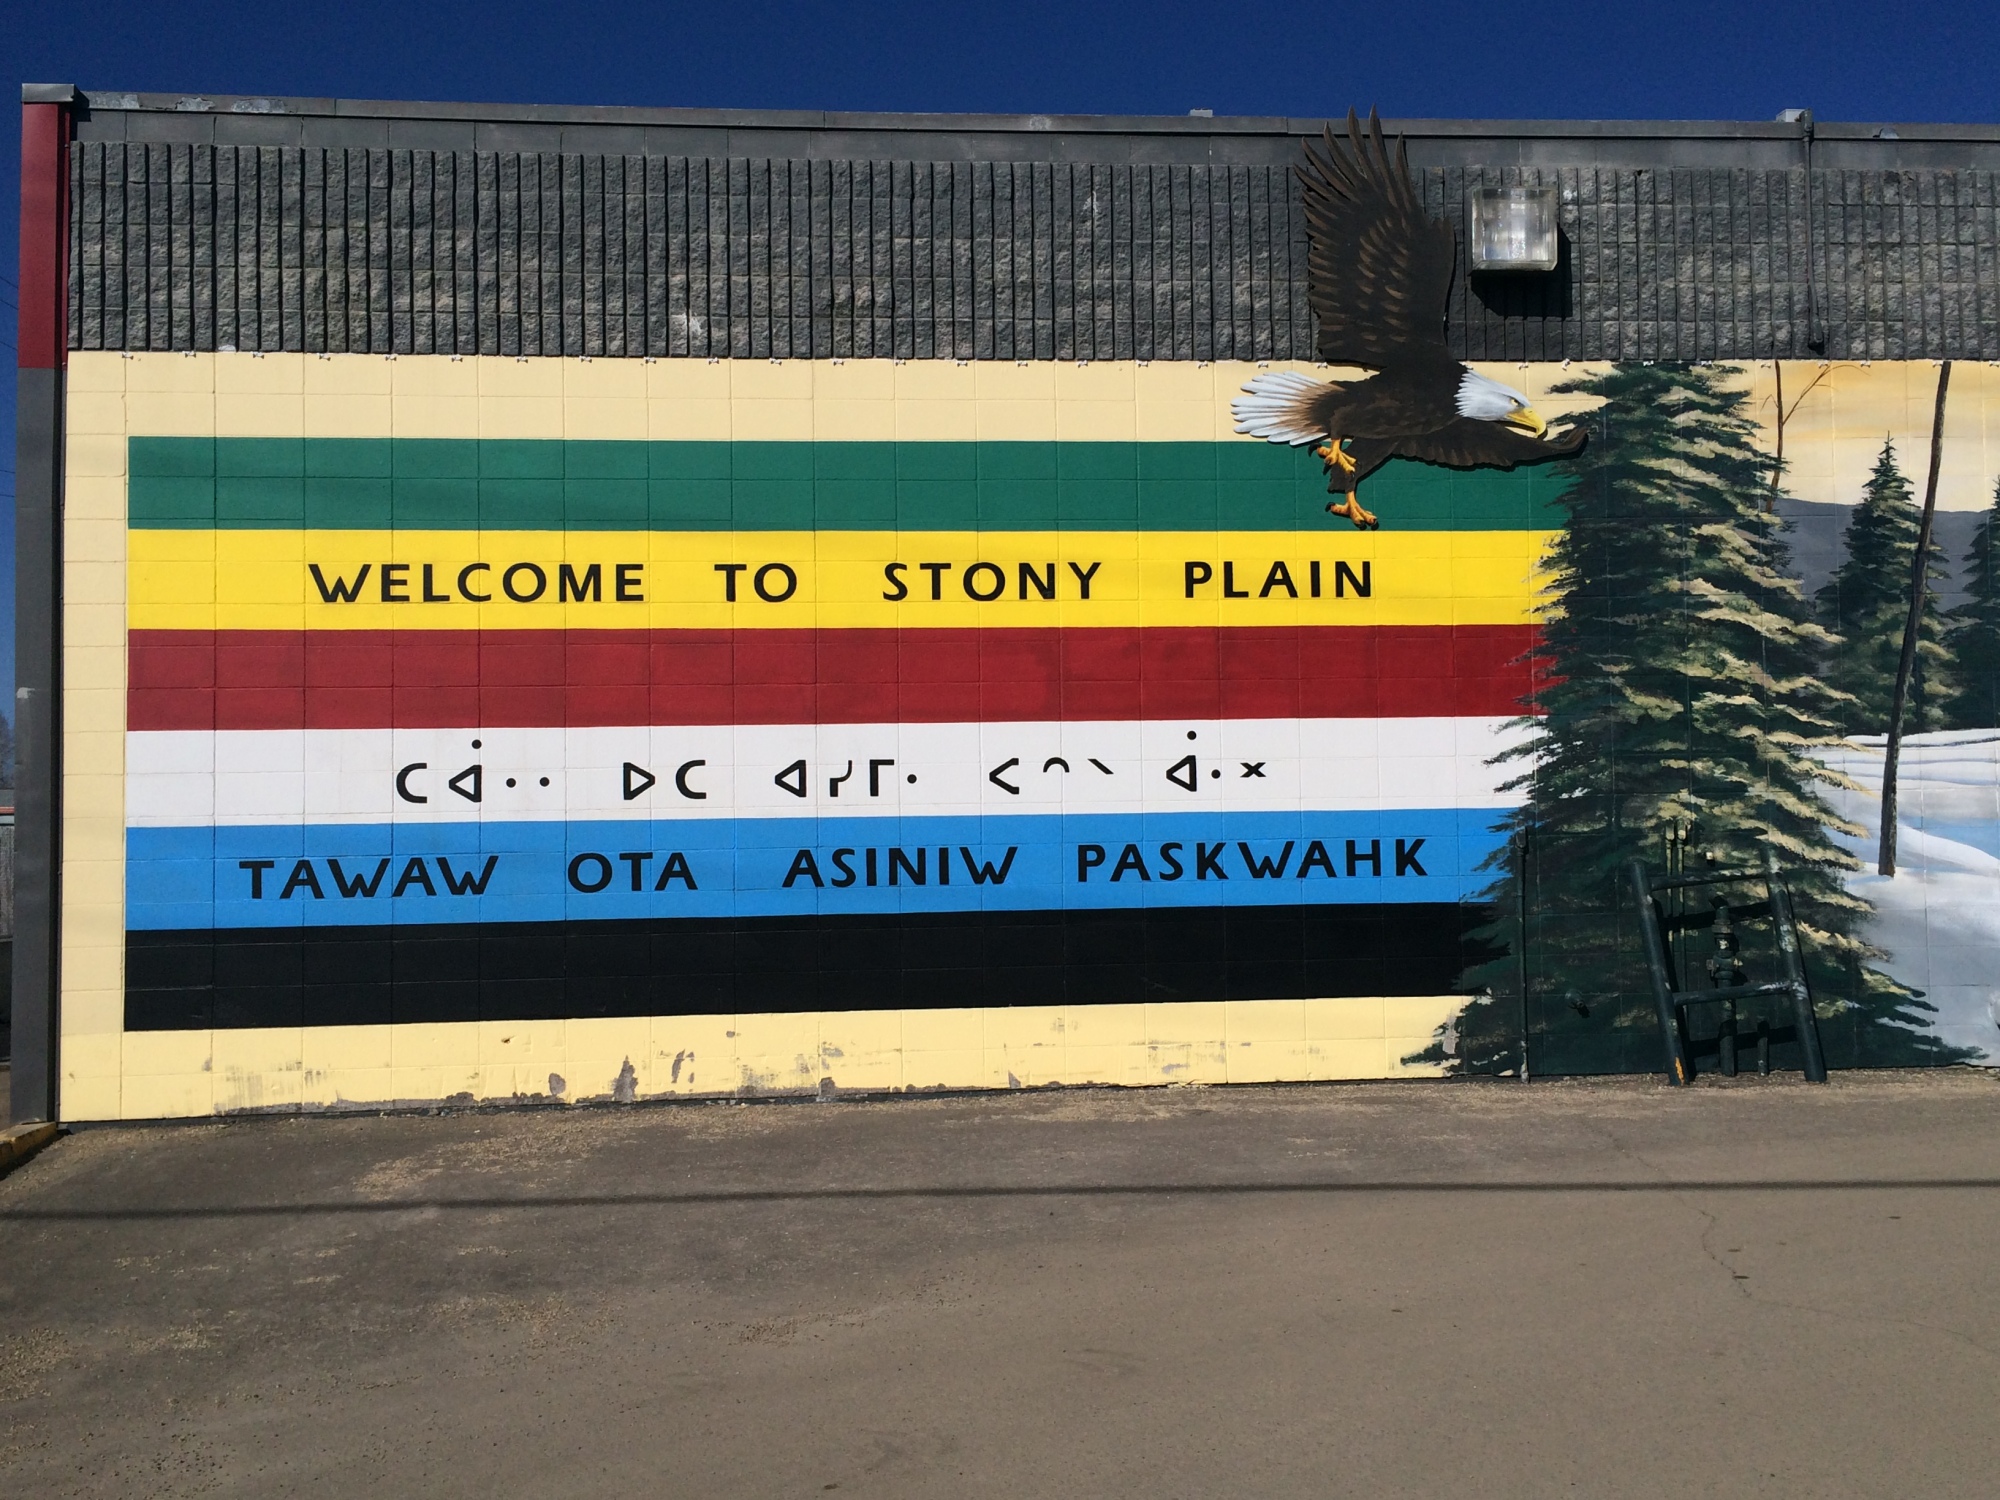 On the wall of the town's co-op grocery store, this mural welcomes visitors in English and (I believe) the language of the First Nations Stoney peoples.